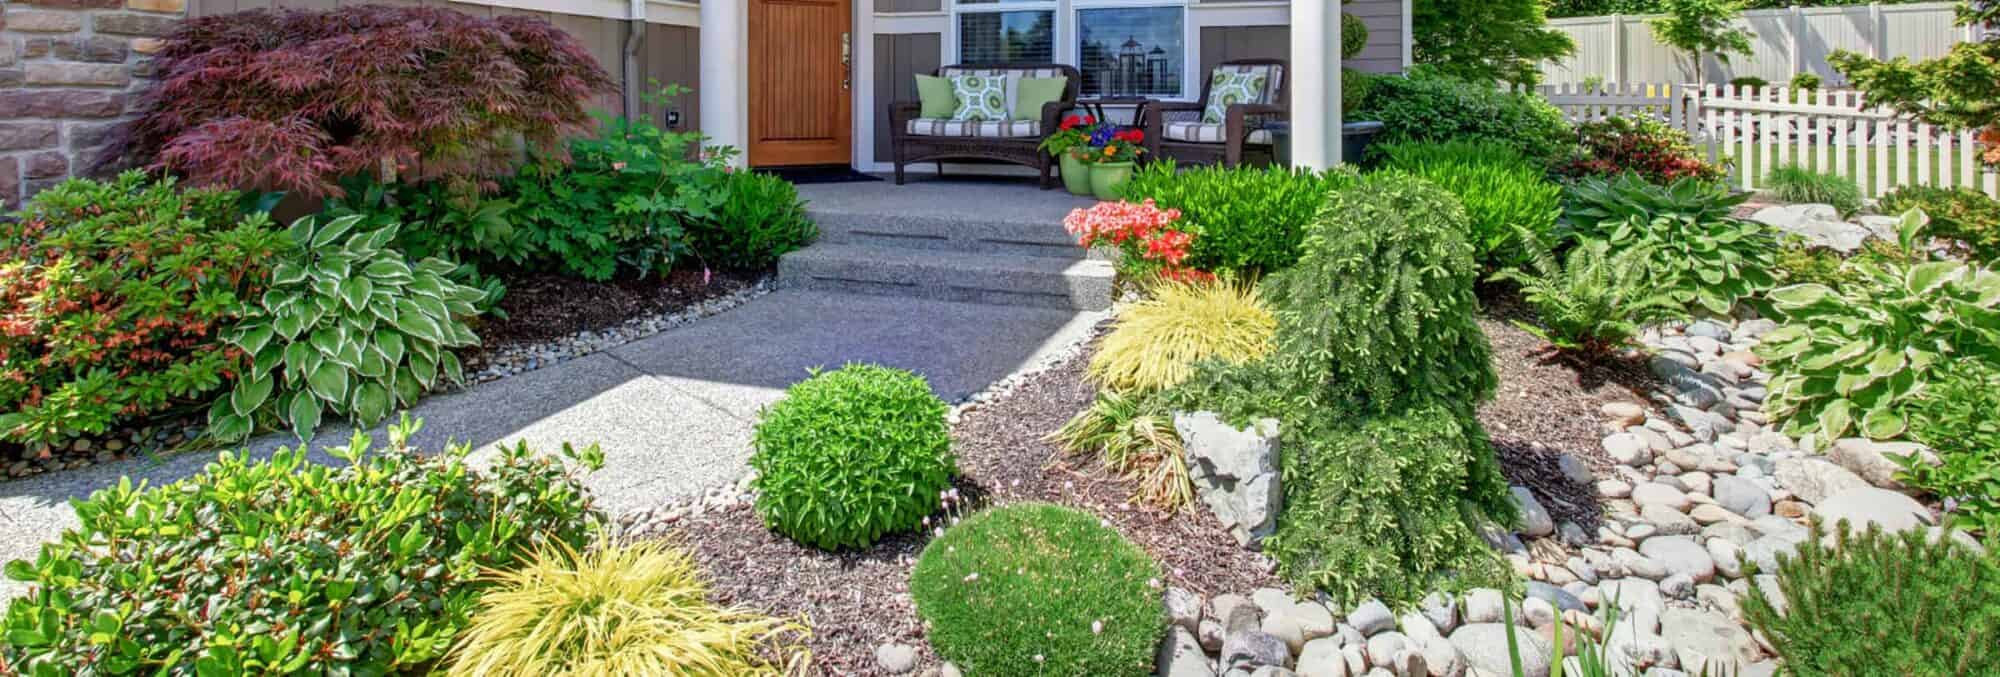 Lawn Care Monaca Pa Tuma, How To Start A Landscaping Business In Pa